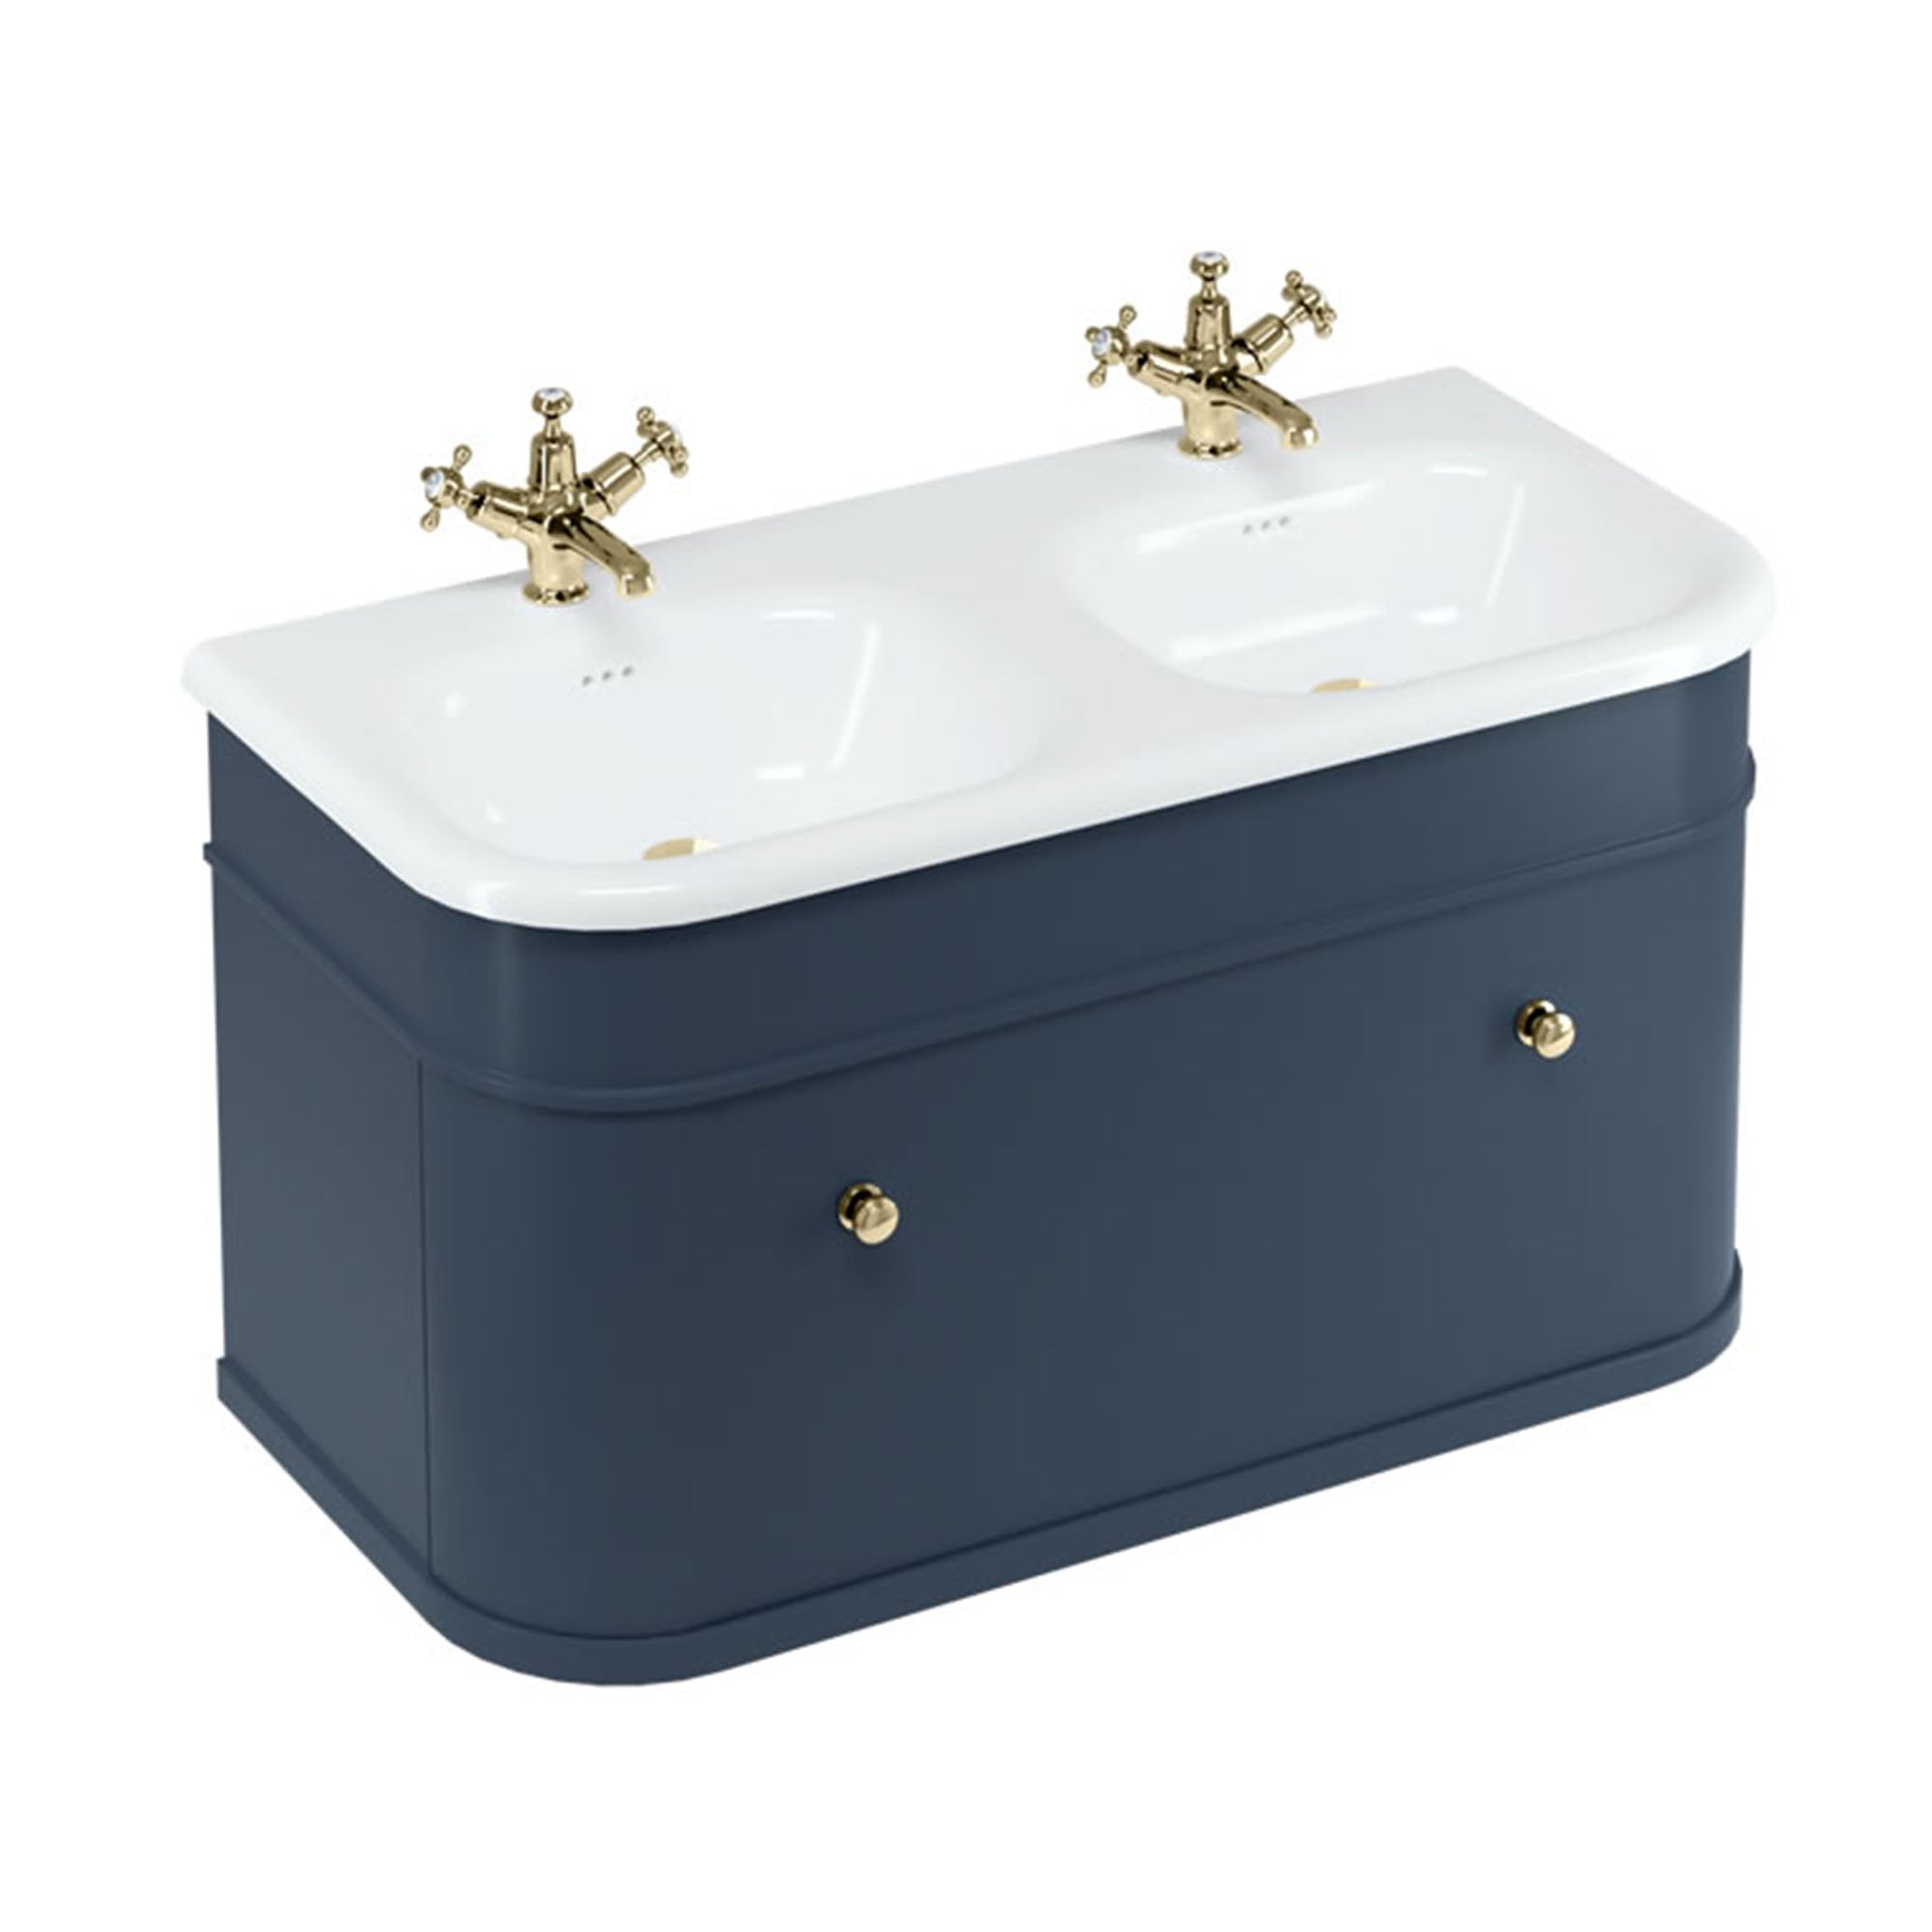 burlington chalfont 1000 wall mounted vanity unit with double roll top basin blue